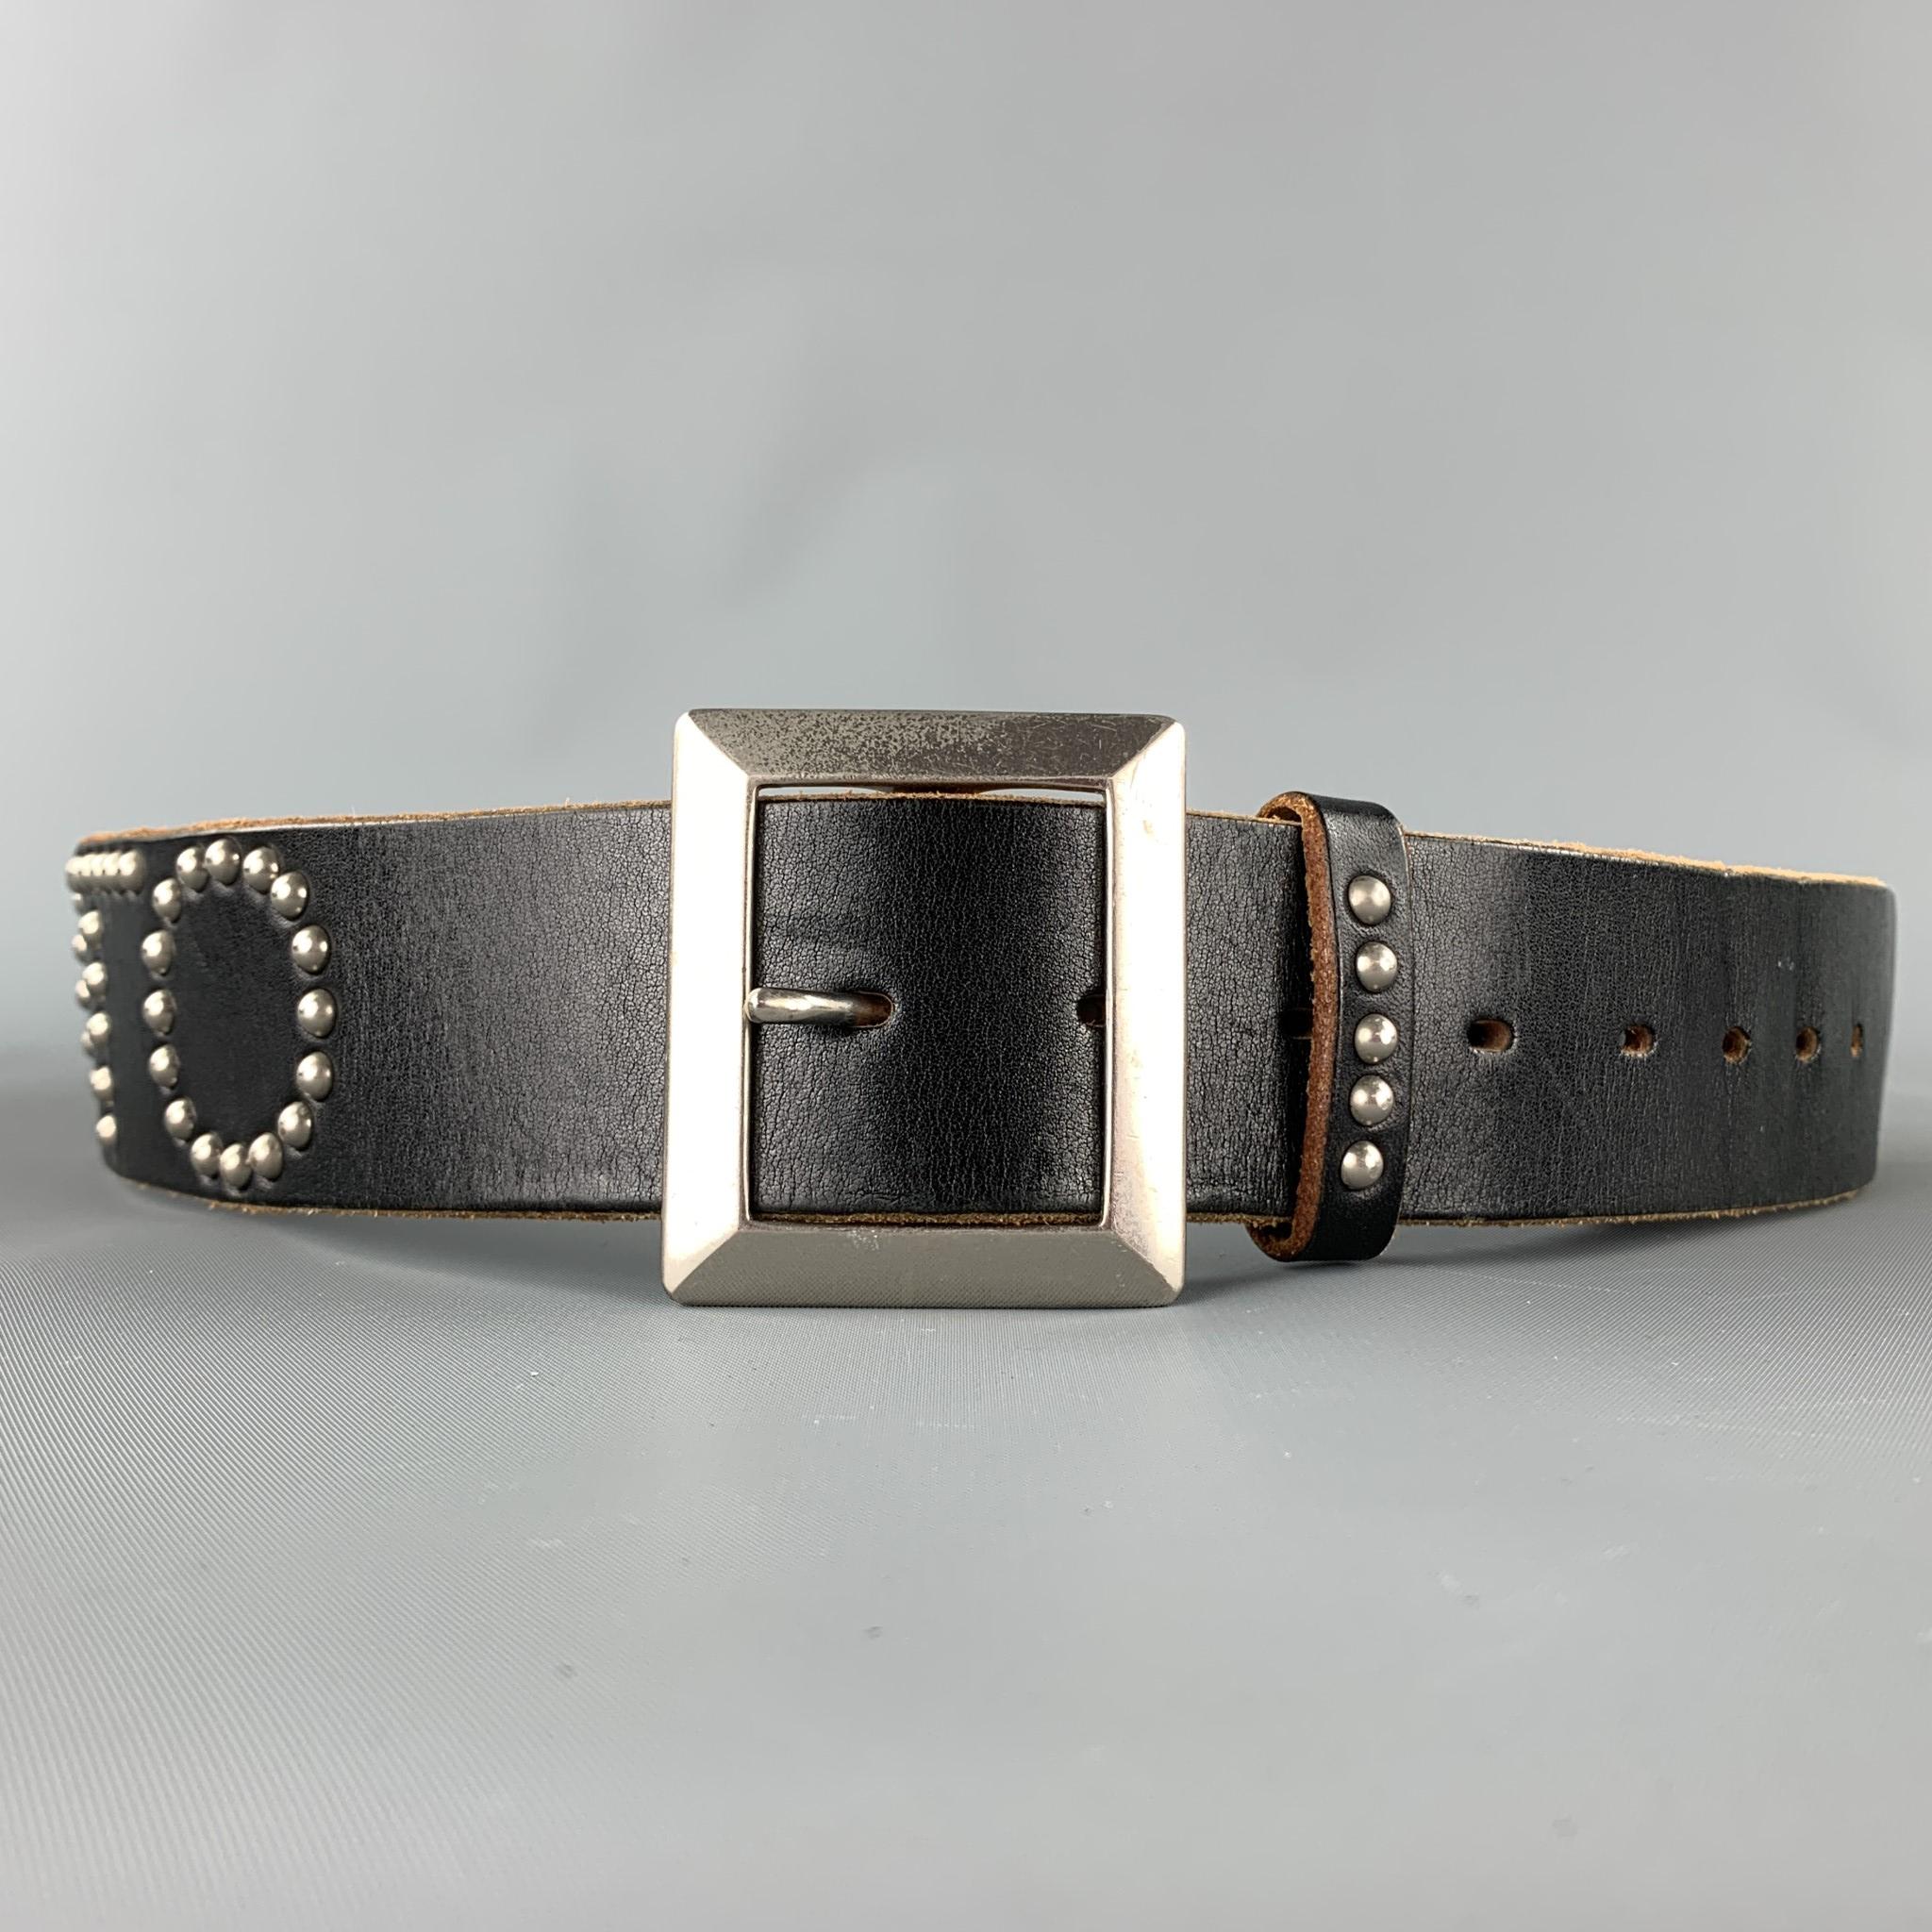 Vintage YOHJI YAMAMOTO belt comes in a black leather with a studded 